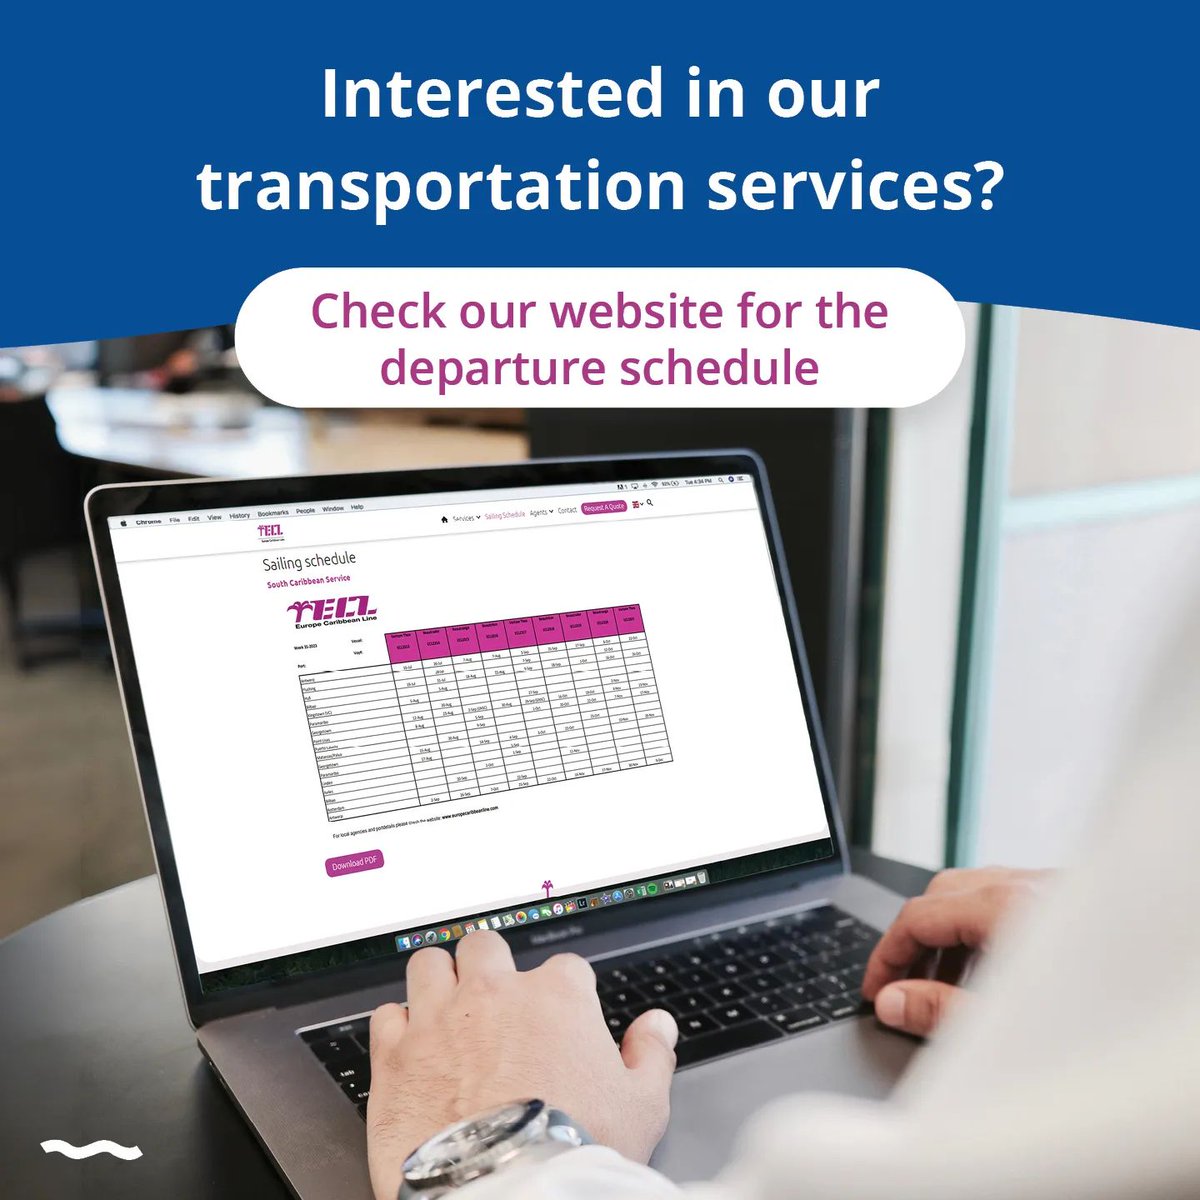 Interested in checking the departure schedule? You can do so effortlessly through on website! 
vertraco.nl/en/ 

#sailingschedule #flushingport #shippingcontainer #shipstagram #shipworldwide #worldwideshipping #shipment